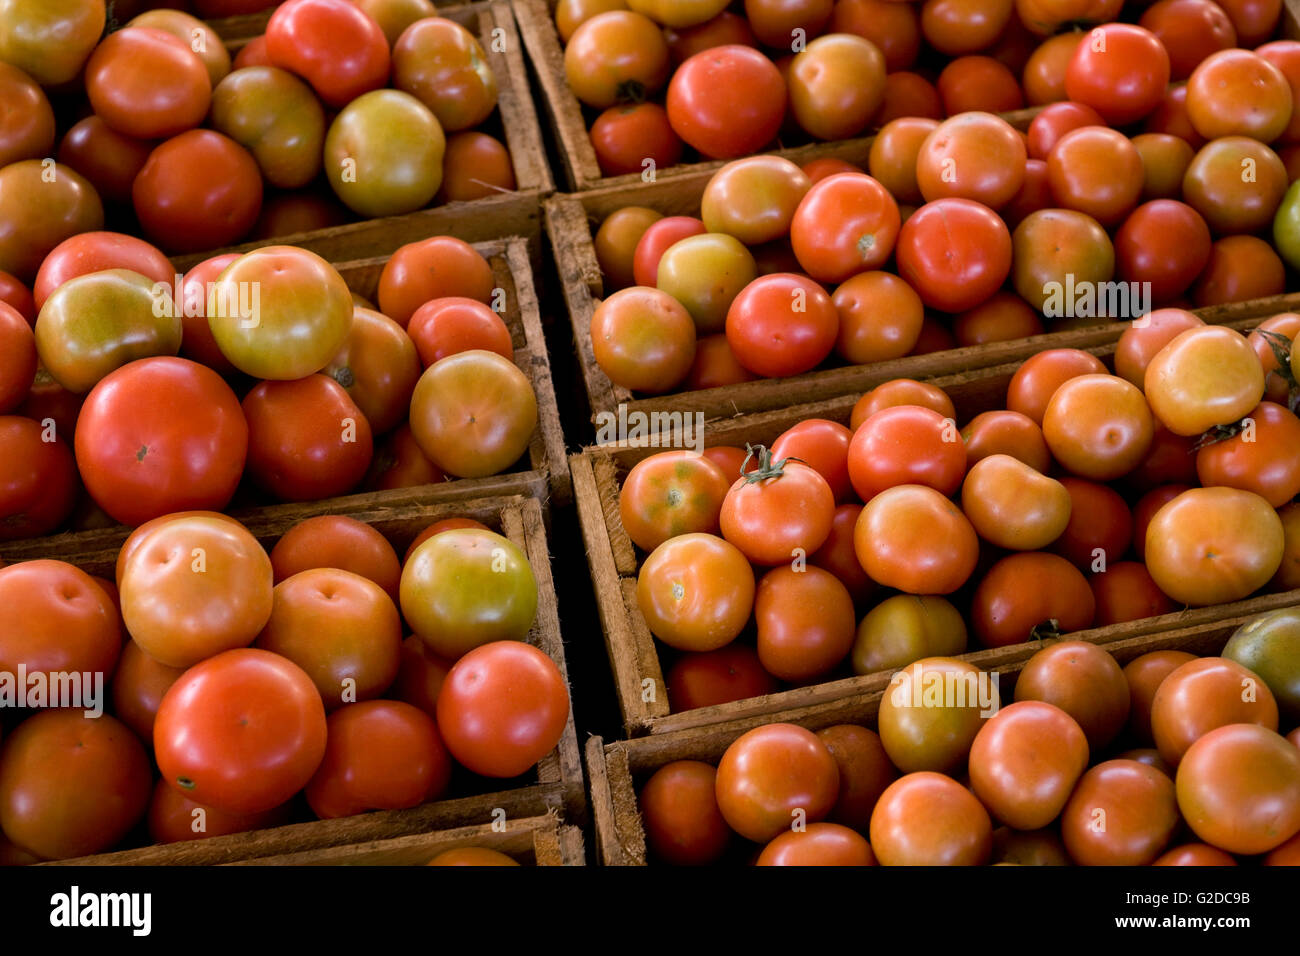 Crates of Tomatoes Stock Photo